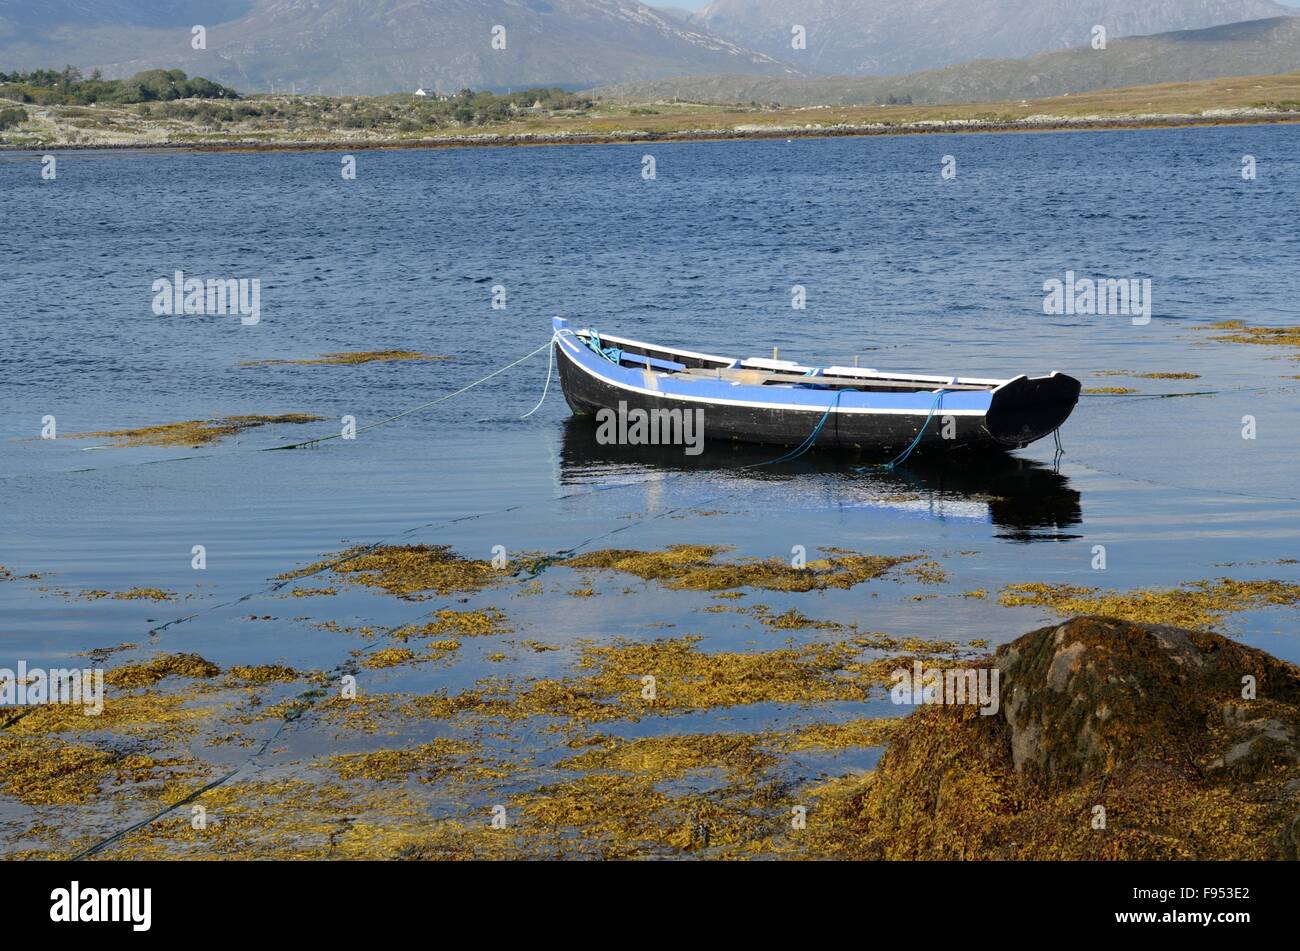 small currach boat used to drag bales of seaweed for processing Inishnee Roundstone Connemara county Glaway Ireland Stock Photo